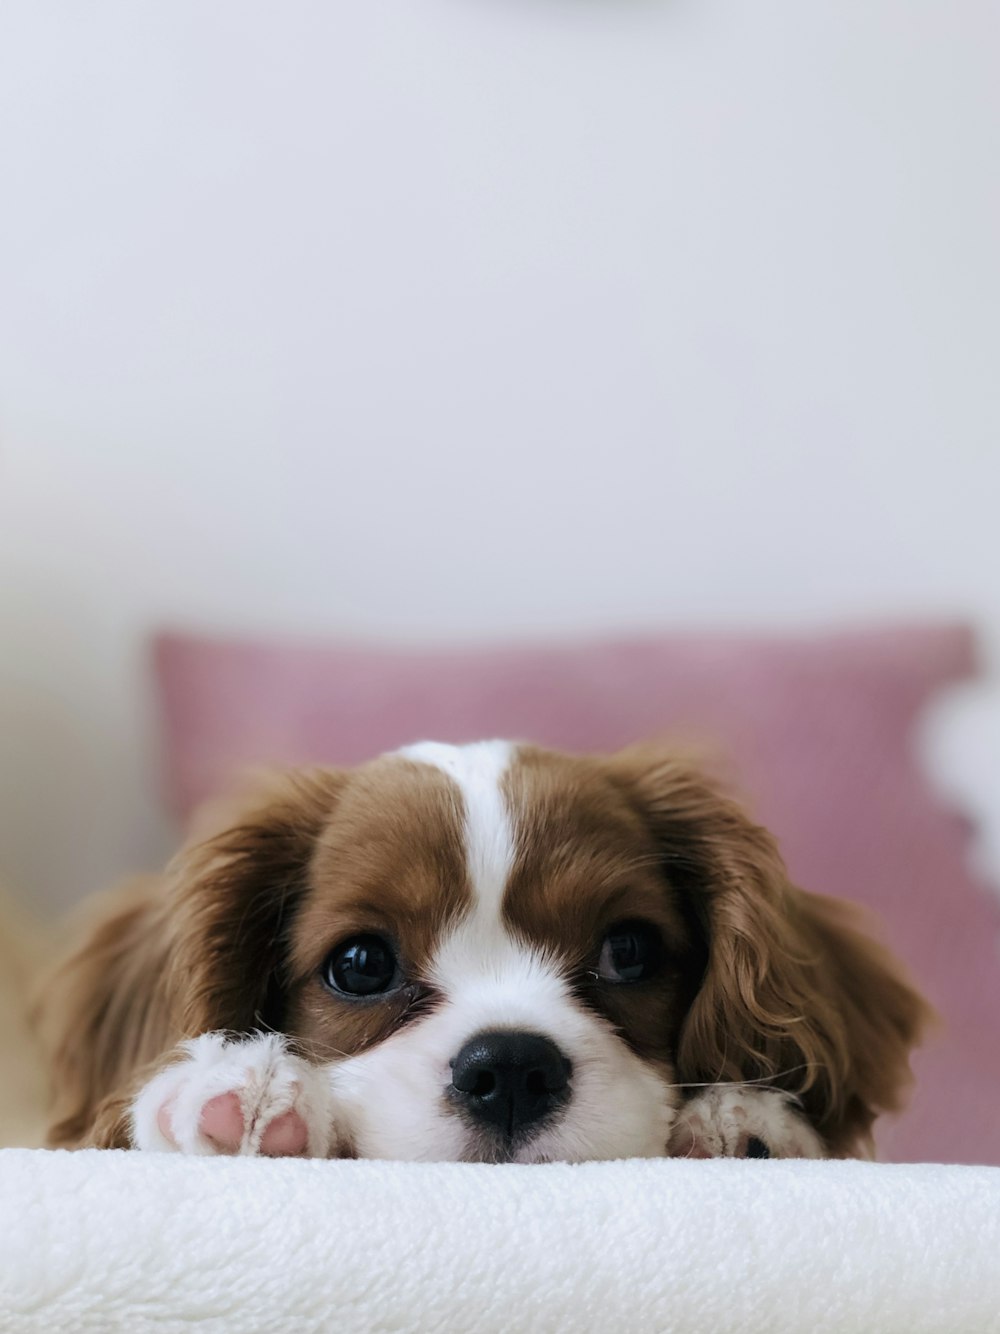 100+ Dogs Pictures | Download Free Images on Unsplash